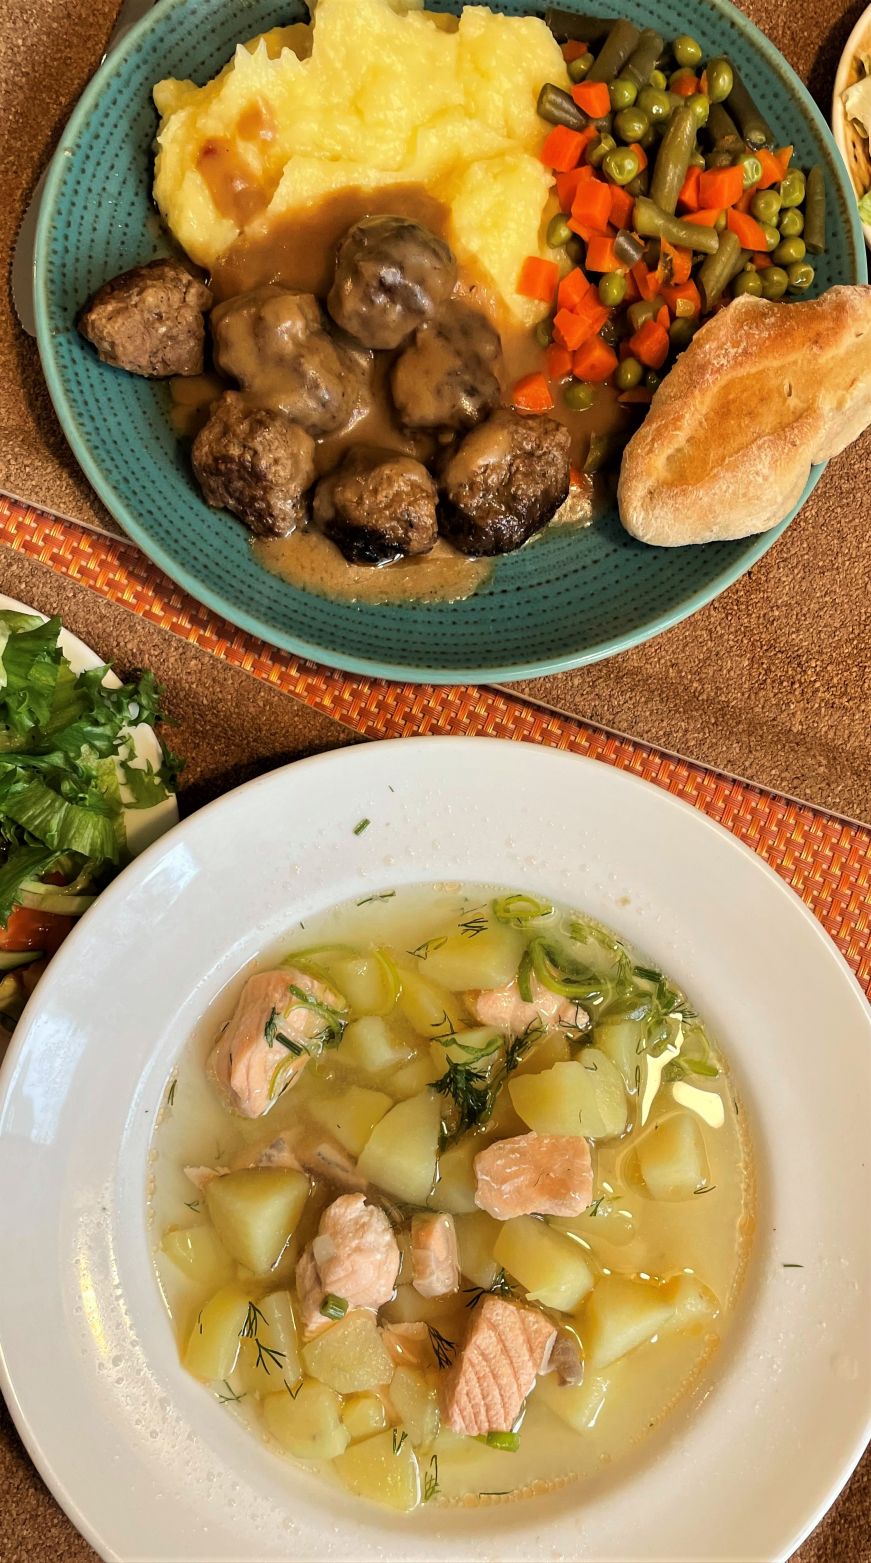 Plate of meatballs, mashed potatoes, and vegetables and bowl of salmon soup